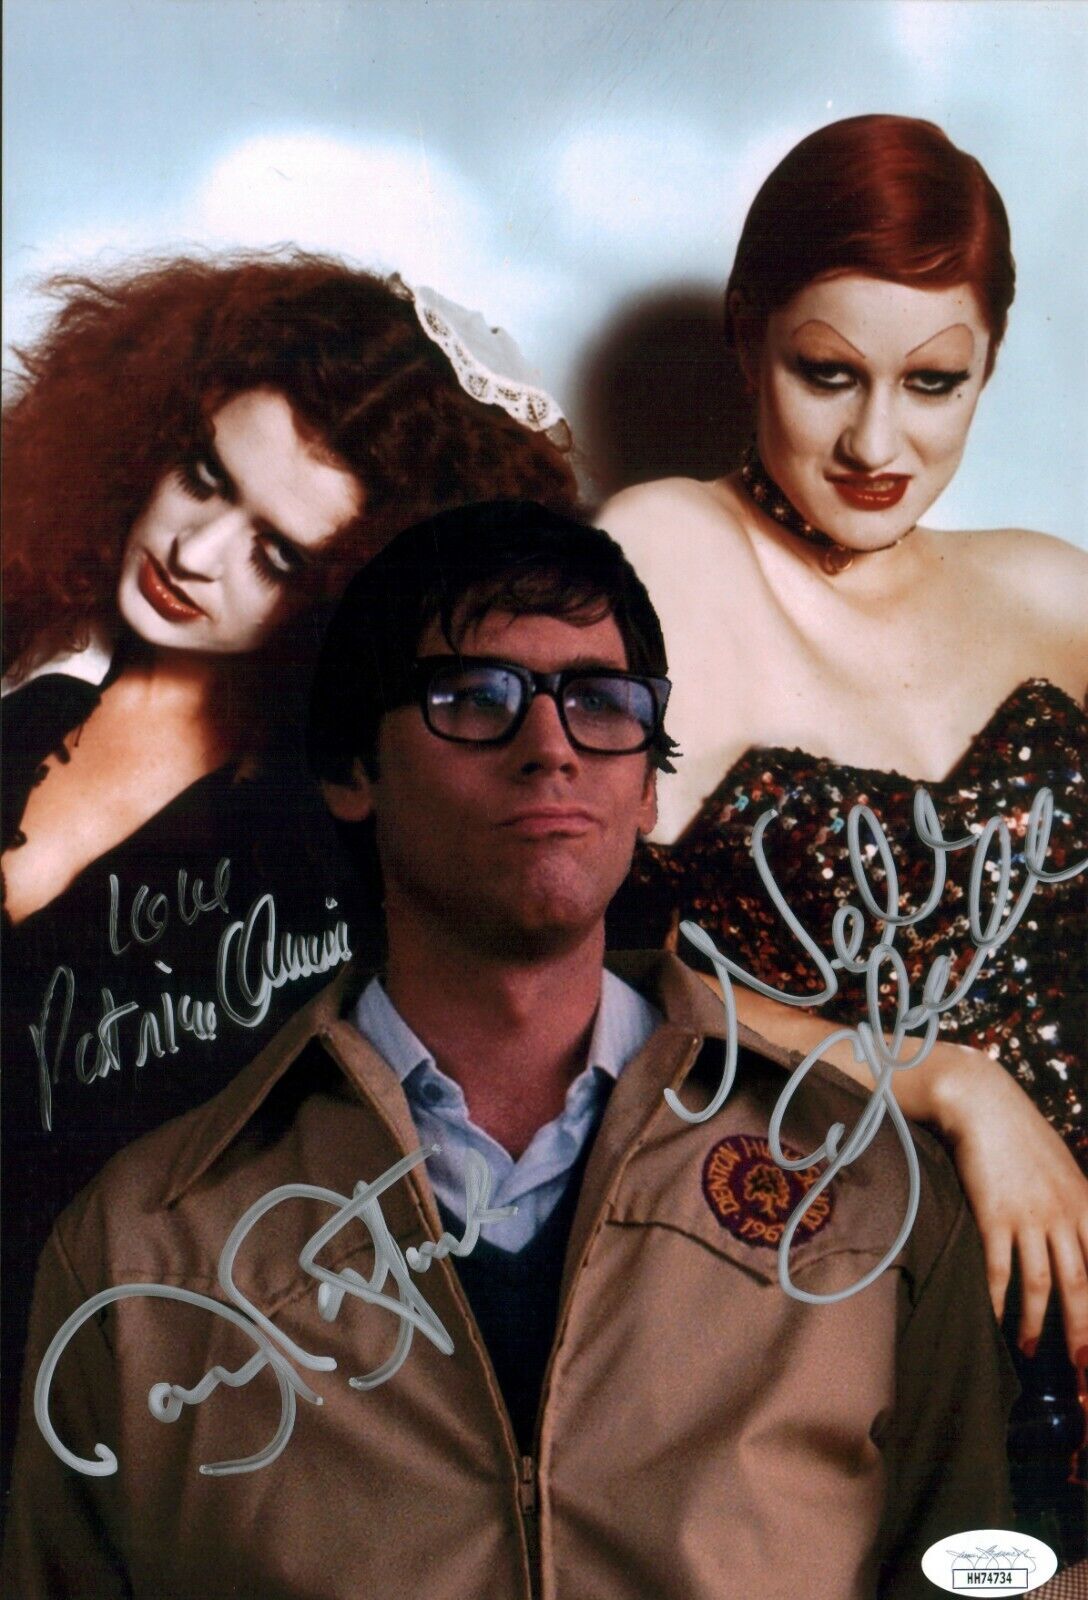 RHPS 8x12 Photo Poster painting Signed Autograph Bostwick Campbell Quinn JSA Certified COA